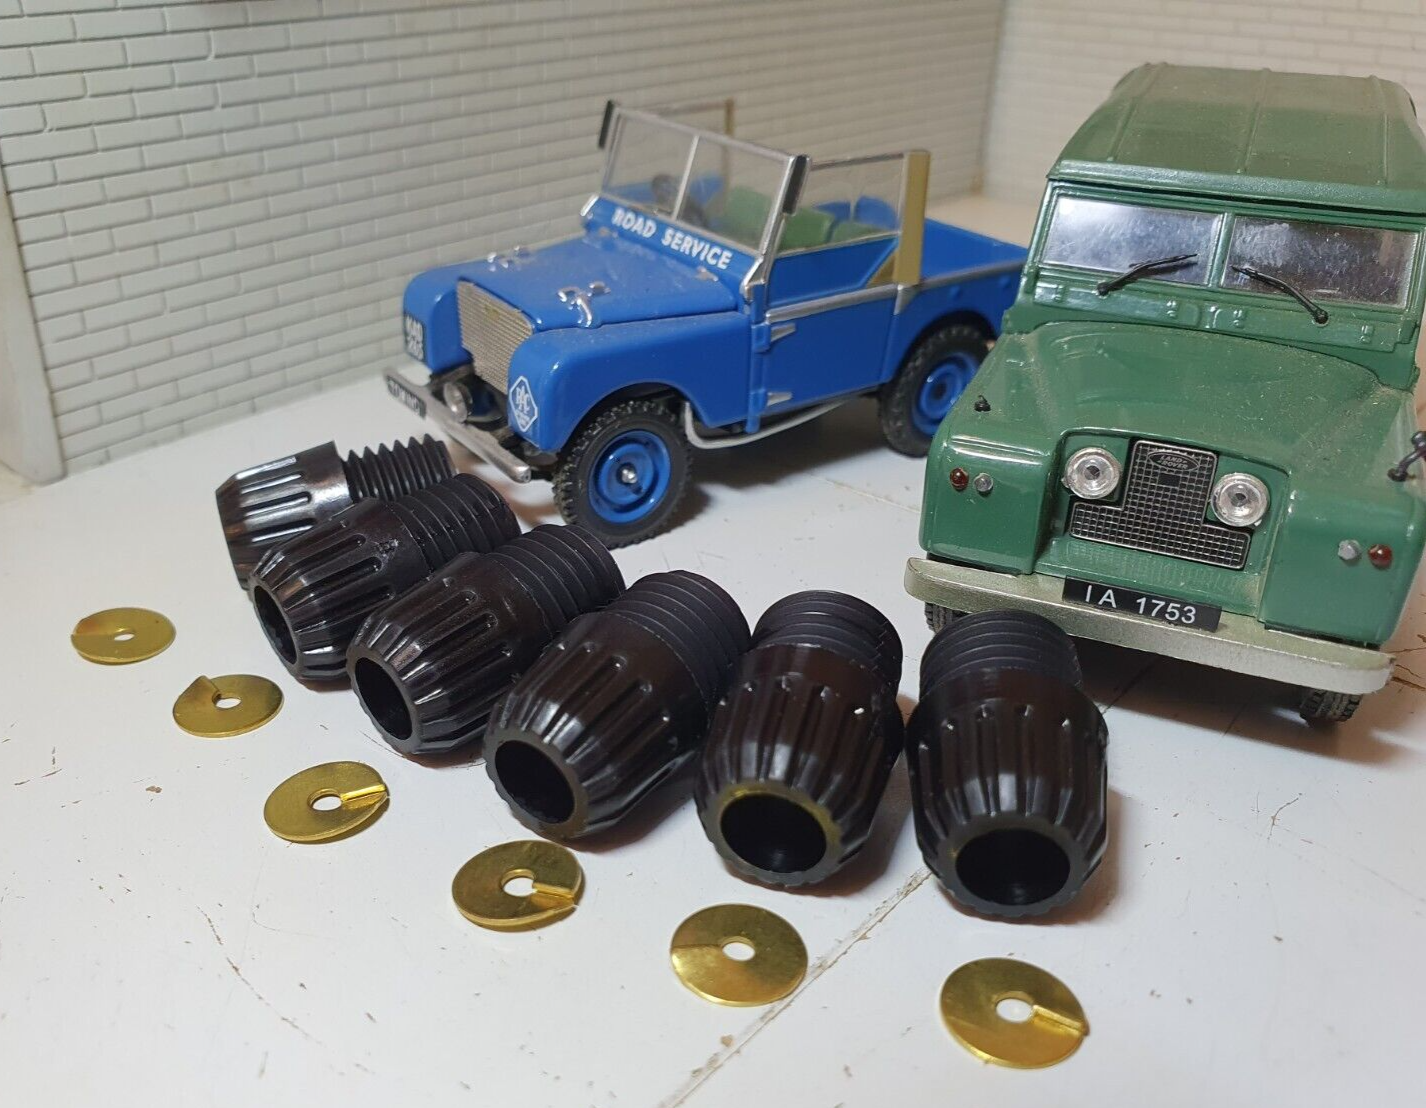 Six Lucas Acorn Spark Plug Screw Caps With Metal Washers And Two Model Land Rovers In The Background